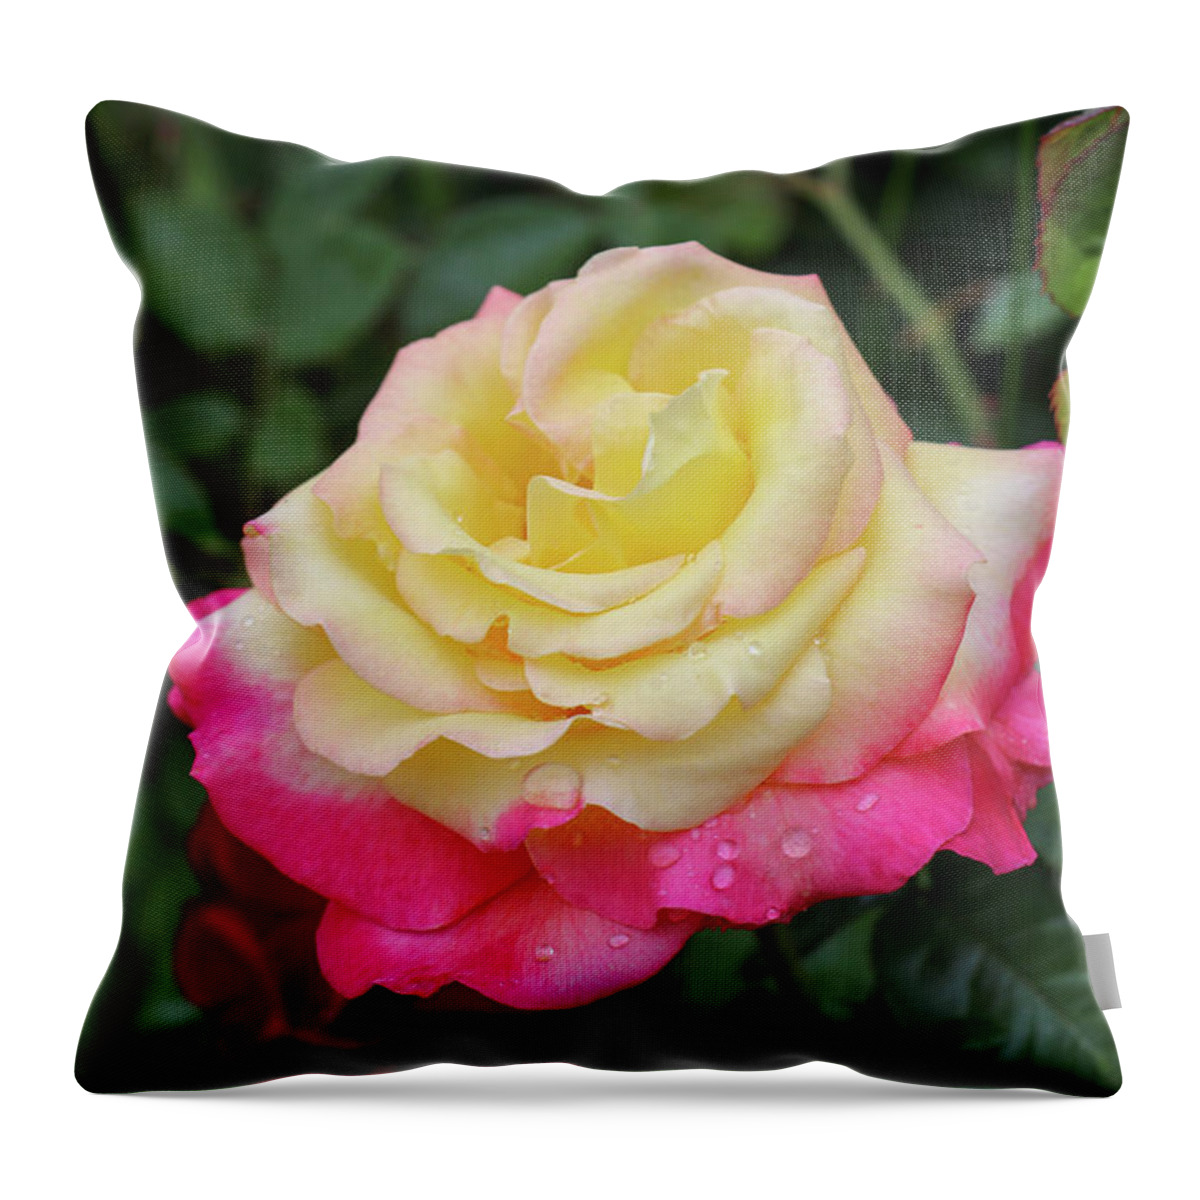 Rose Throw Pillow featuring the photograph Two Tone Beauty by Mary Anne Delgado